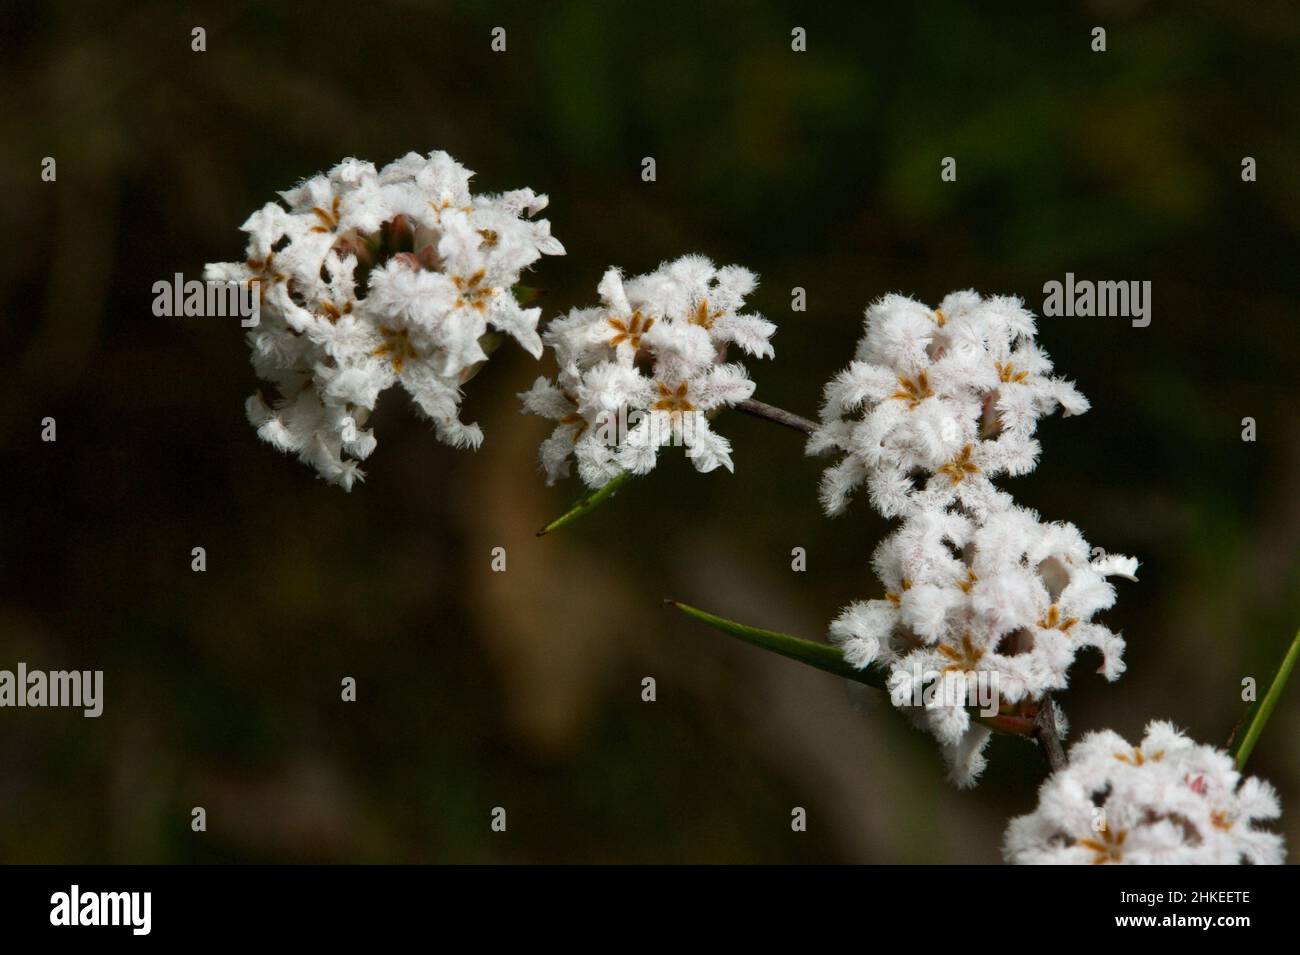 Slender Rice Flower (Pimelea Linifolia) looks like it should be called Woolly Rice Flower (Pimelea Octophylla), the flowers are so fluffy! Stock Photo